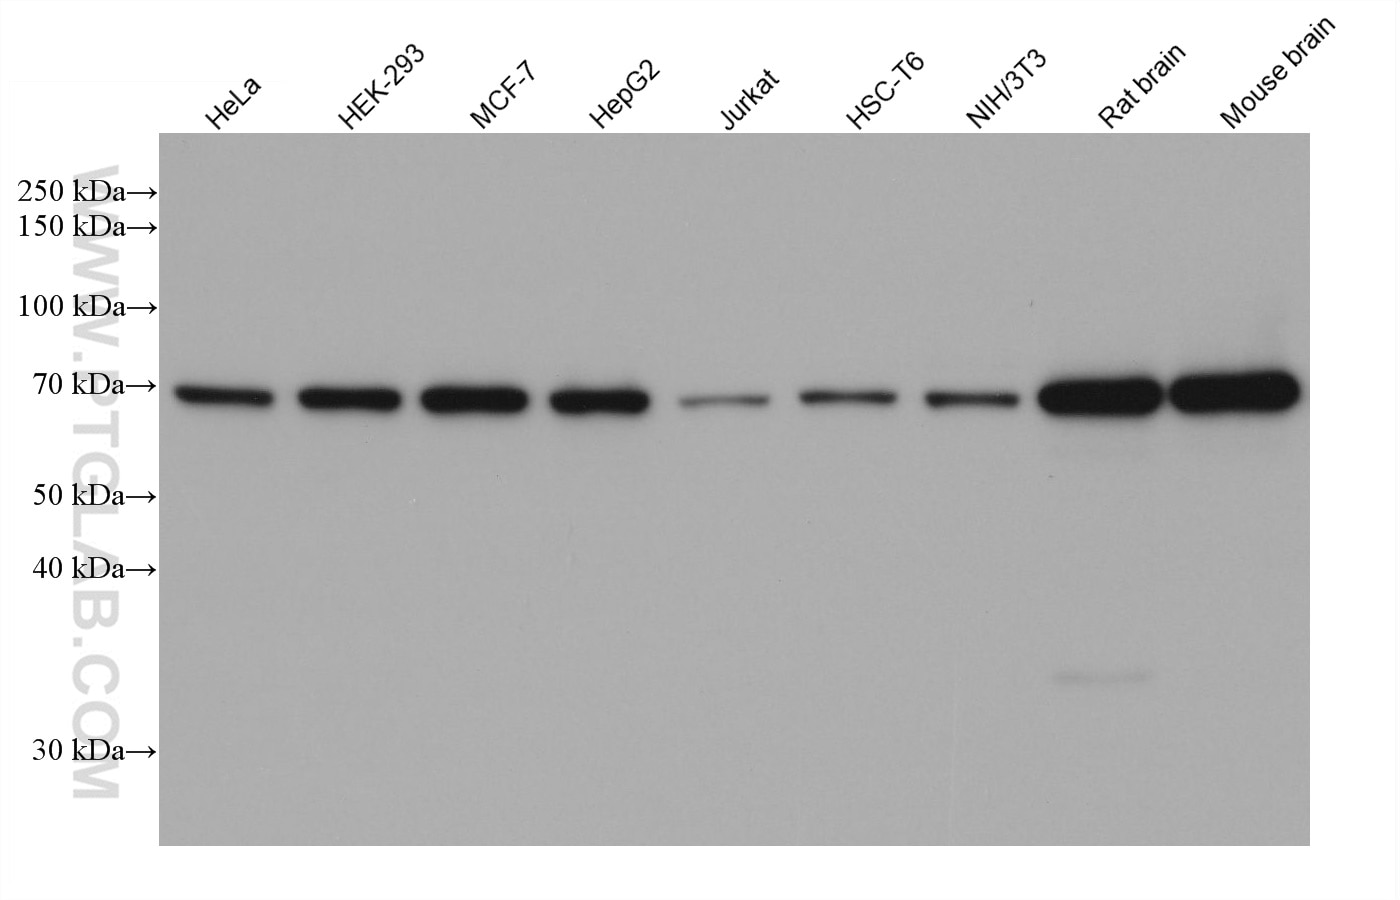 Various lysates were subjected to SDS-PAGE followed by western blot with rabbit anti-TOM70 polyclonal antibody (14528-1-AP) at dilution of 1:10000. Multi-rAb HRP-Goat Anti-Rabbit Recombinant Secondary Antibody (H+L) (RGAR001) was used at 1:20000 for detection. 